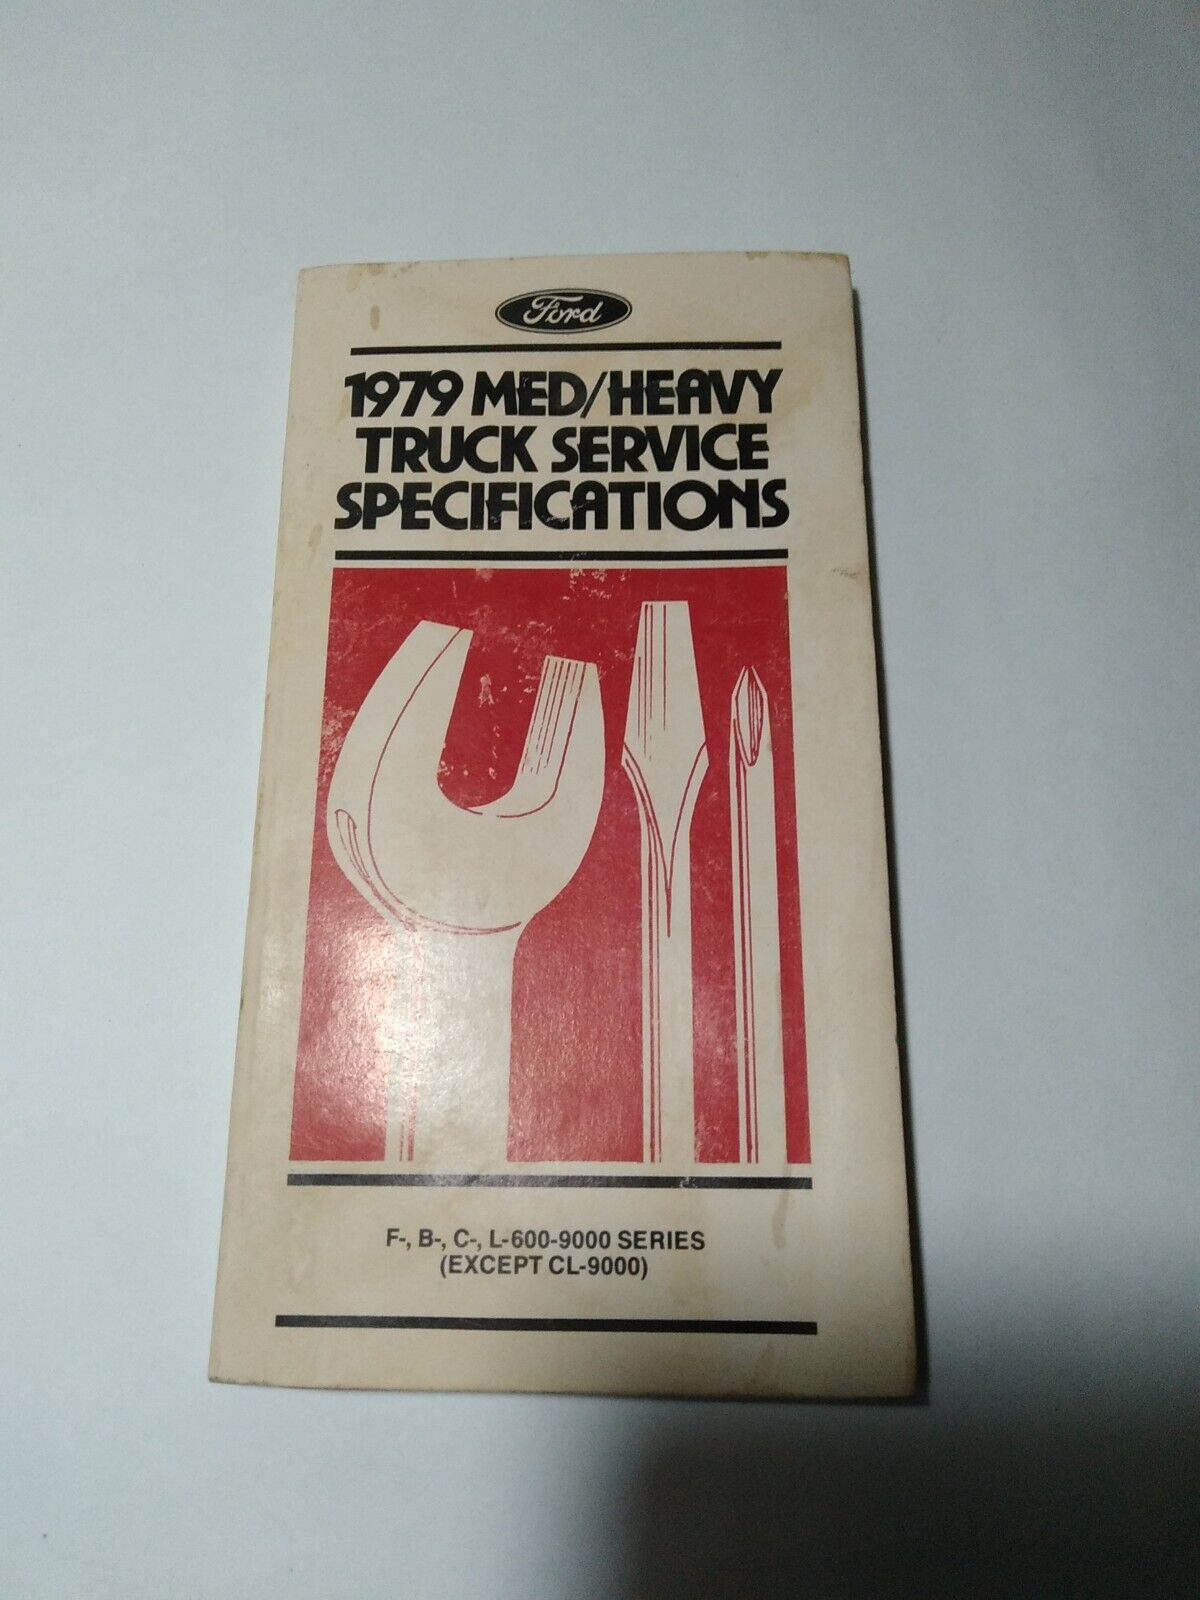 Vintage 1979 MED/HEAVY TRUCK Service Specifications Booklet